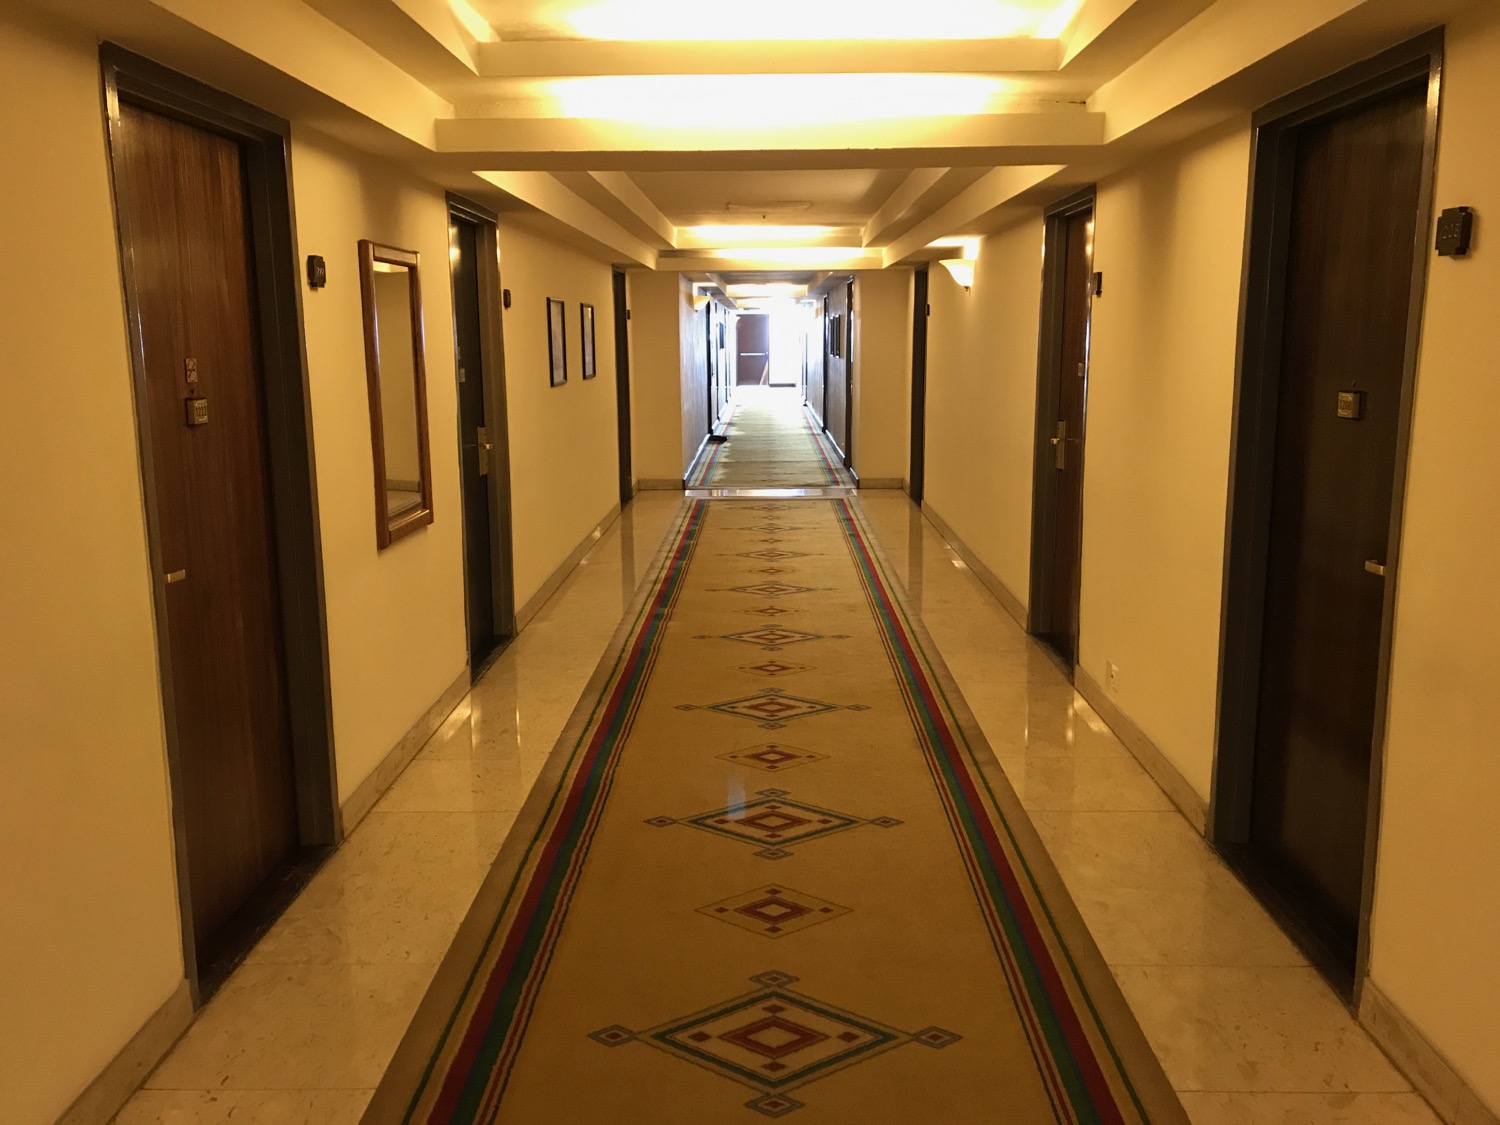 a hallway with a carpet and doors